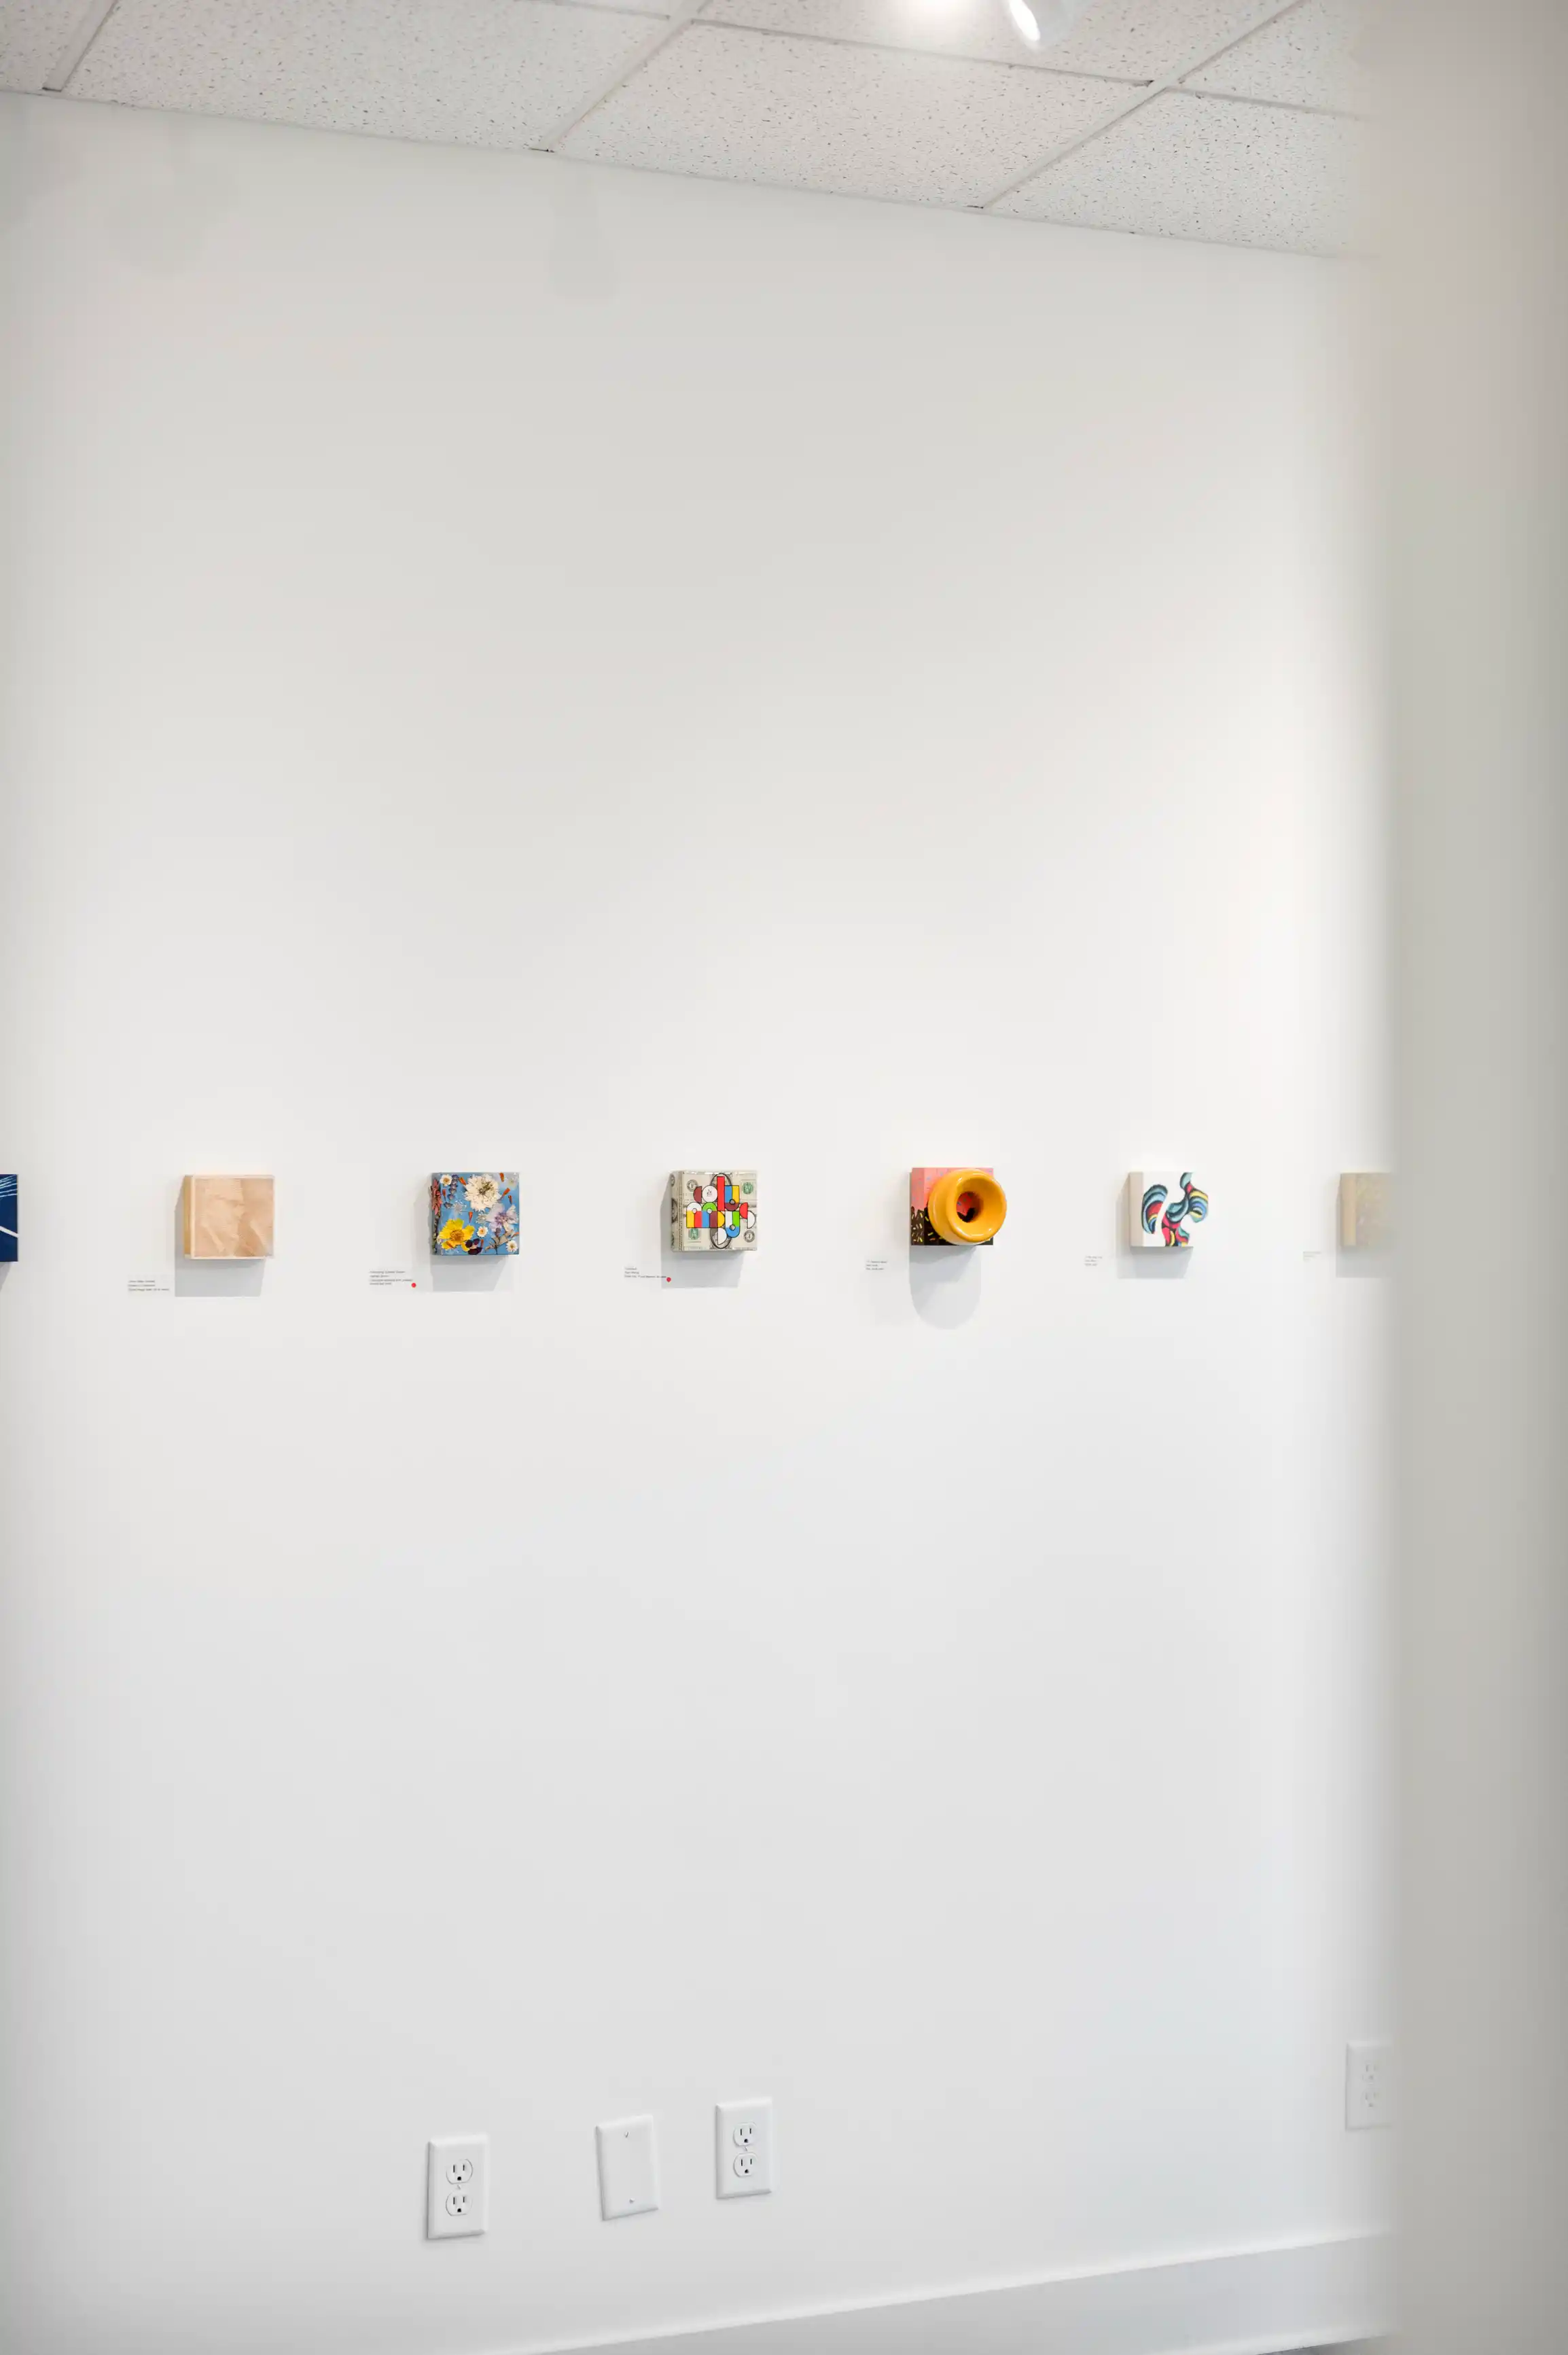 Art installation on a white gallery wall featuring six colorful abstract pieces, each accompanied by a descriptive label below.